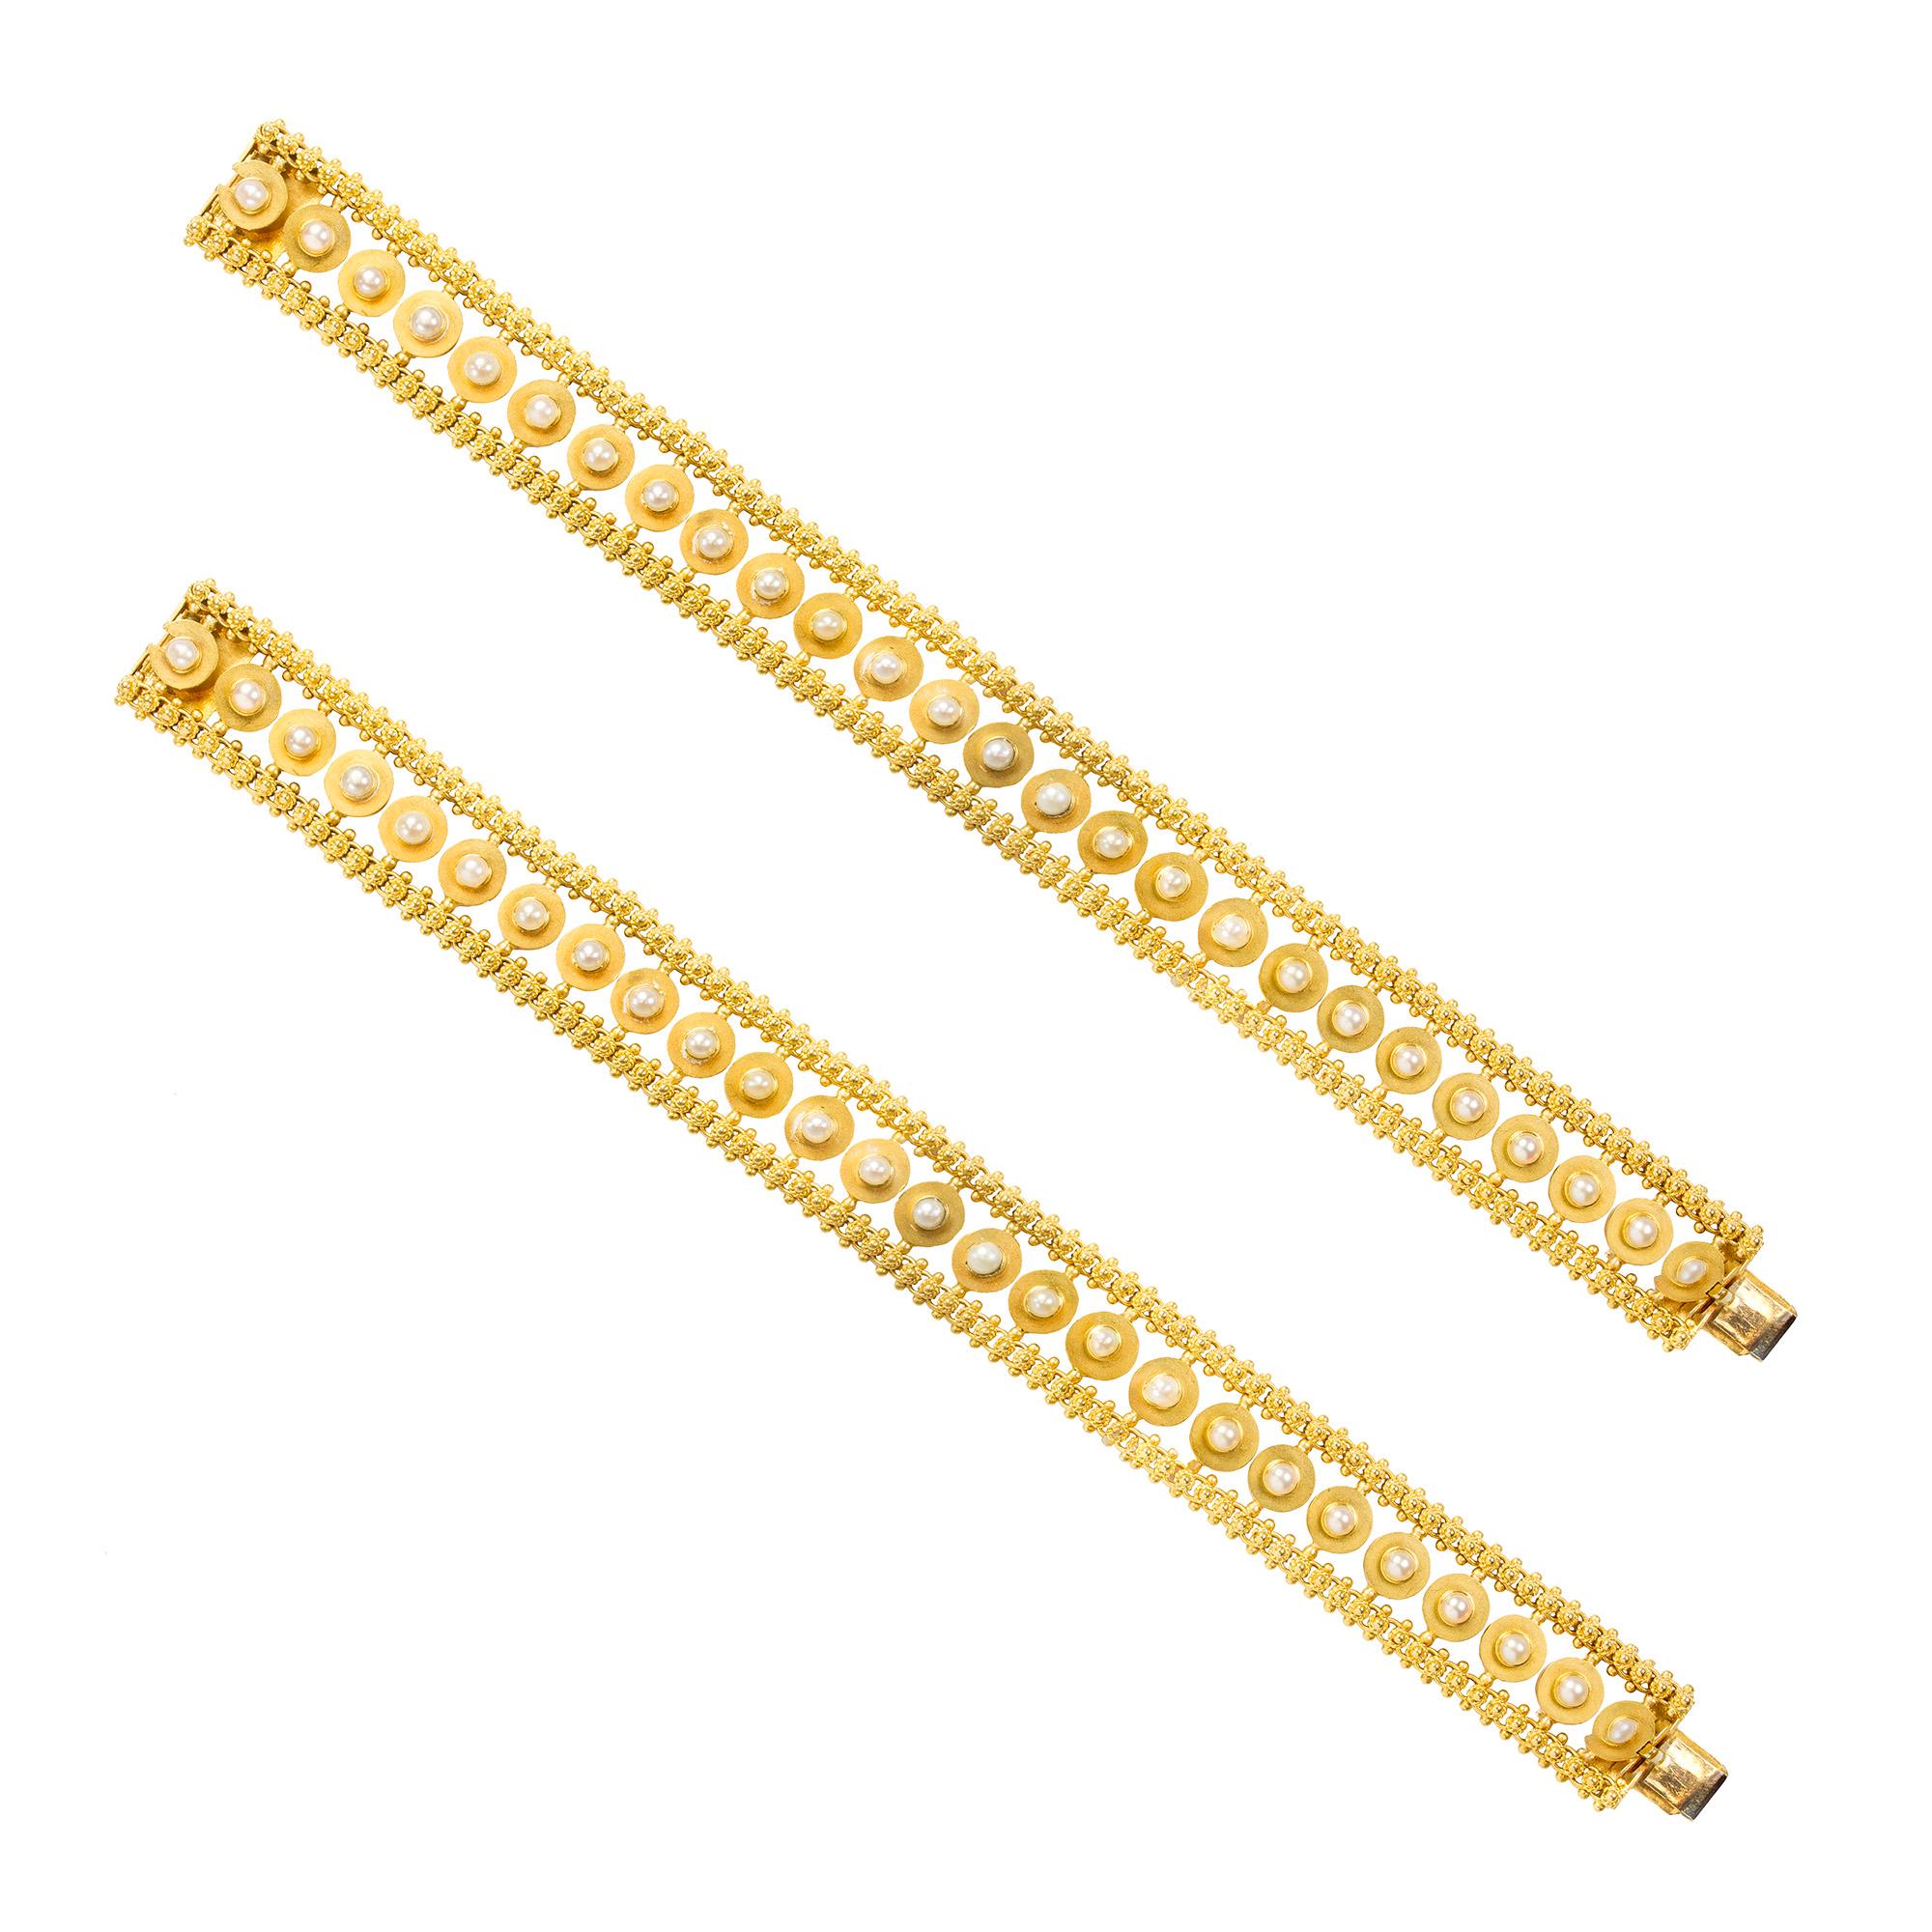 A pair of Victorian half pearl gold bracelets, each bracelet consisting of twenty six gold discs each set with half pearl to the centre and suspended between two cannatile chains, all fire gilded to a concealed snap clasp, circa 1890, measuring